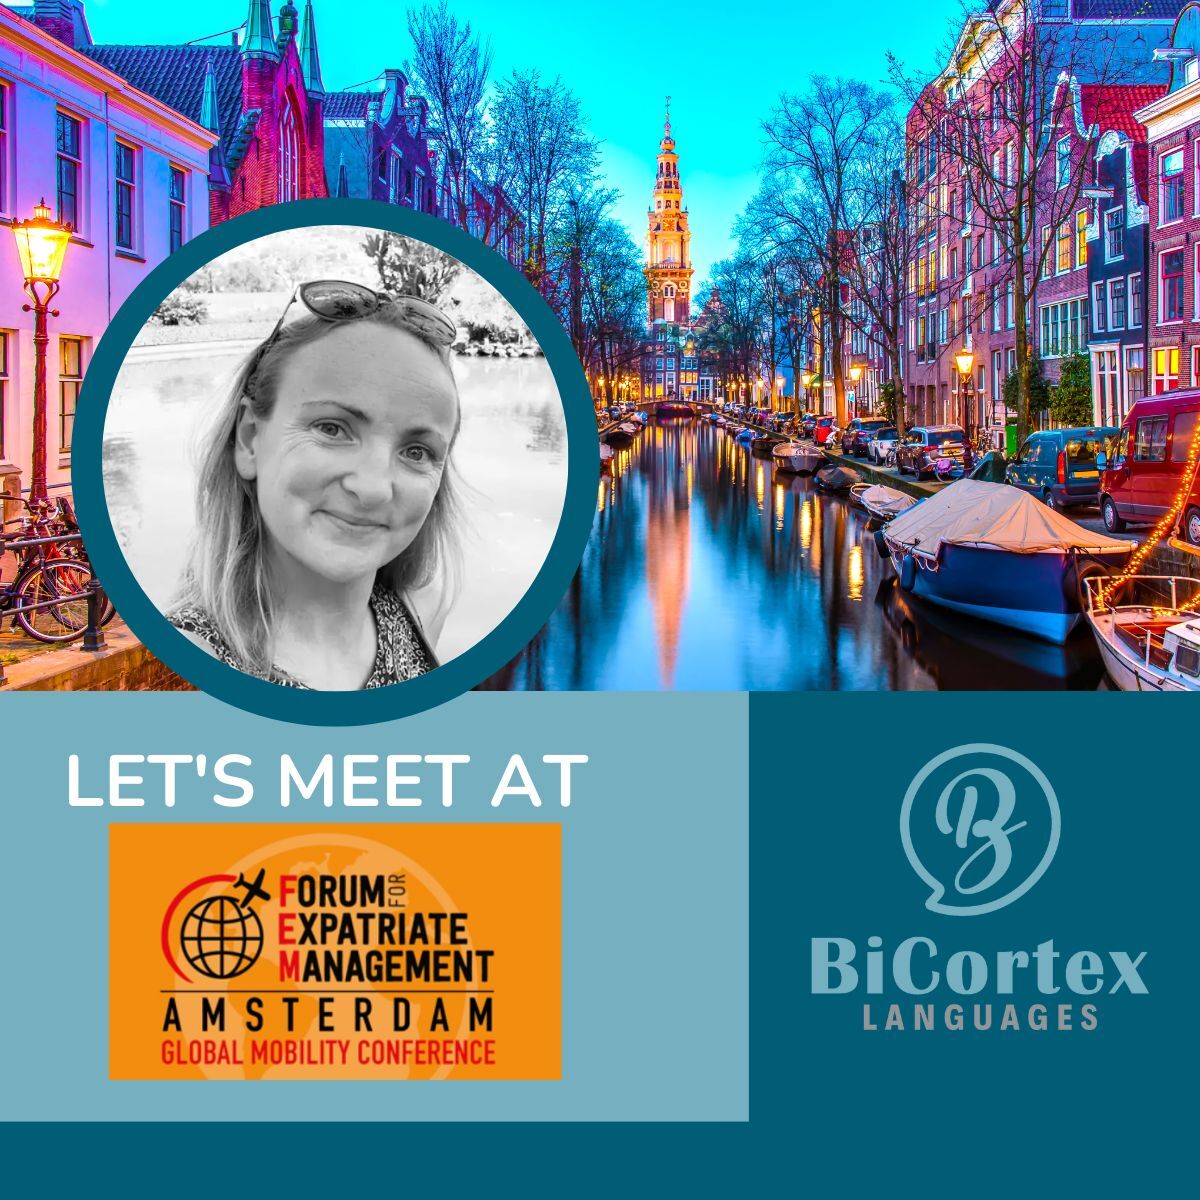 I look forward to meet you at the FEM Amsterdam Conference. 🇳🇱
See you there! ✈️
@MaggieWilliams 
#BiCortex #GlobalMobility #GlobalMigration #Immigration
#TheForumForExpatriateManagement